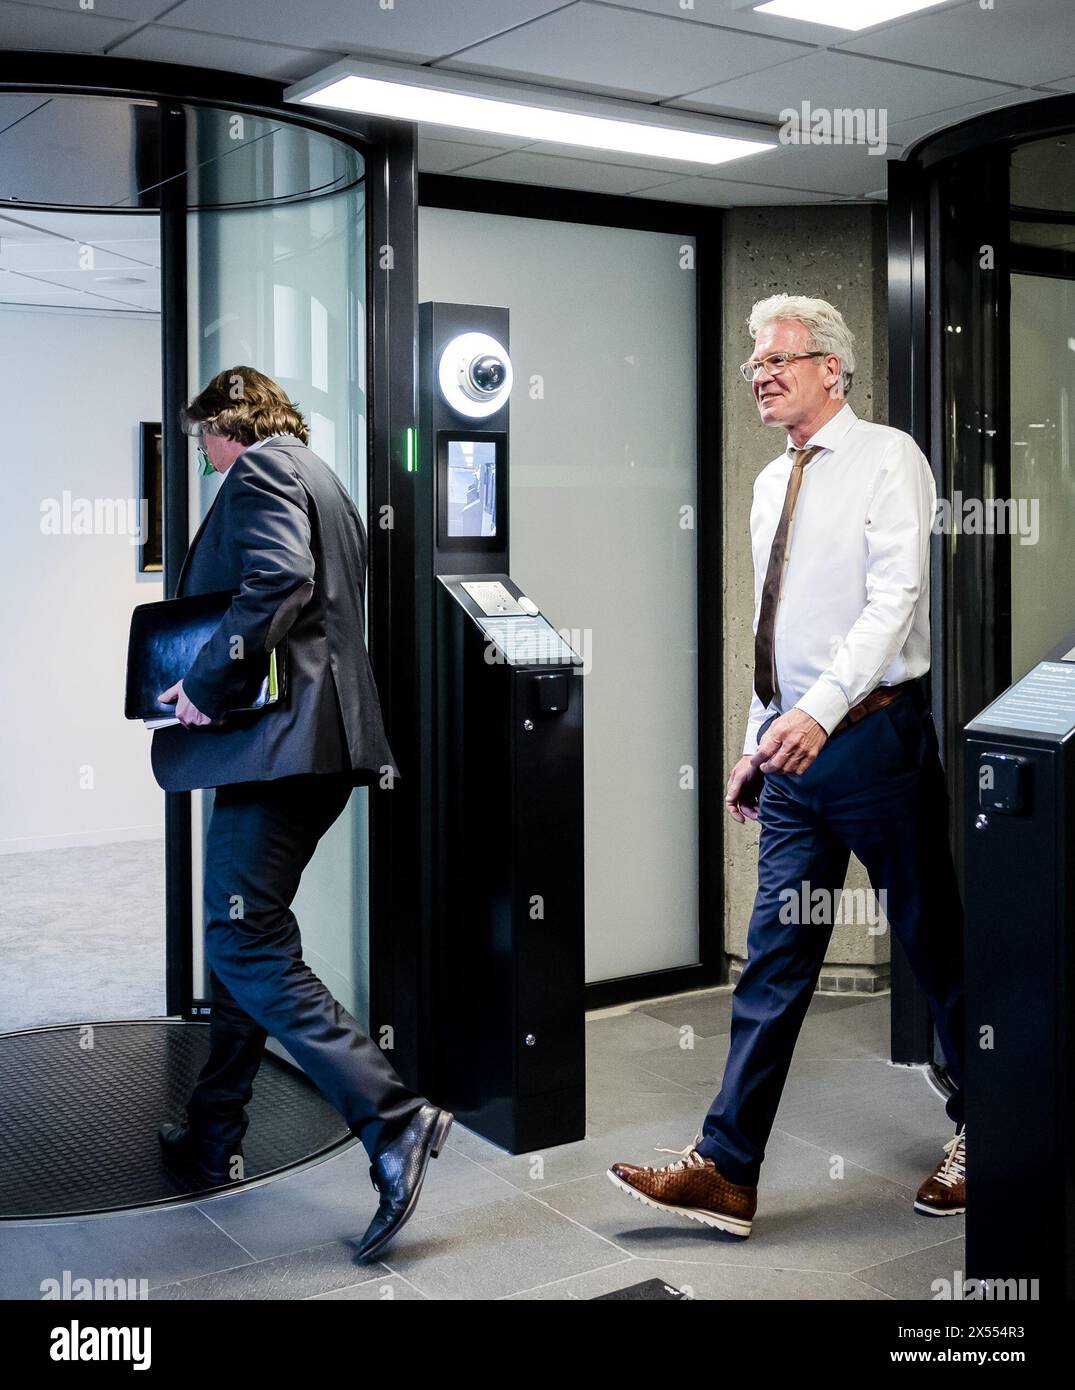 THE HAGUE - Tony van Dijck (PVV) and informant Elbert Dijkgraaf during a break from the formation talks. The parties must agree on an outline agreement this week. This agreement must be in place by May 15. ANP REMKO DE WAAL netherlands out - belgium out Stock Photo